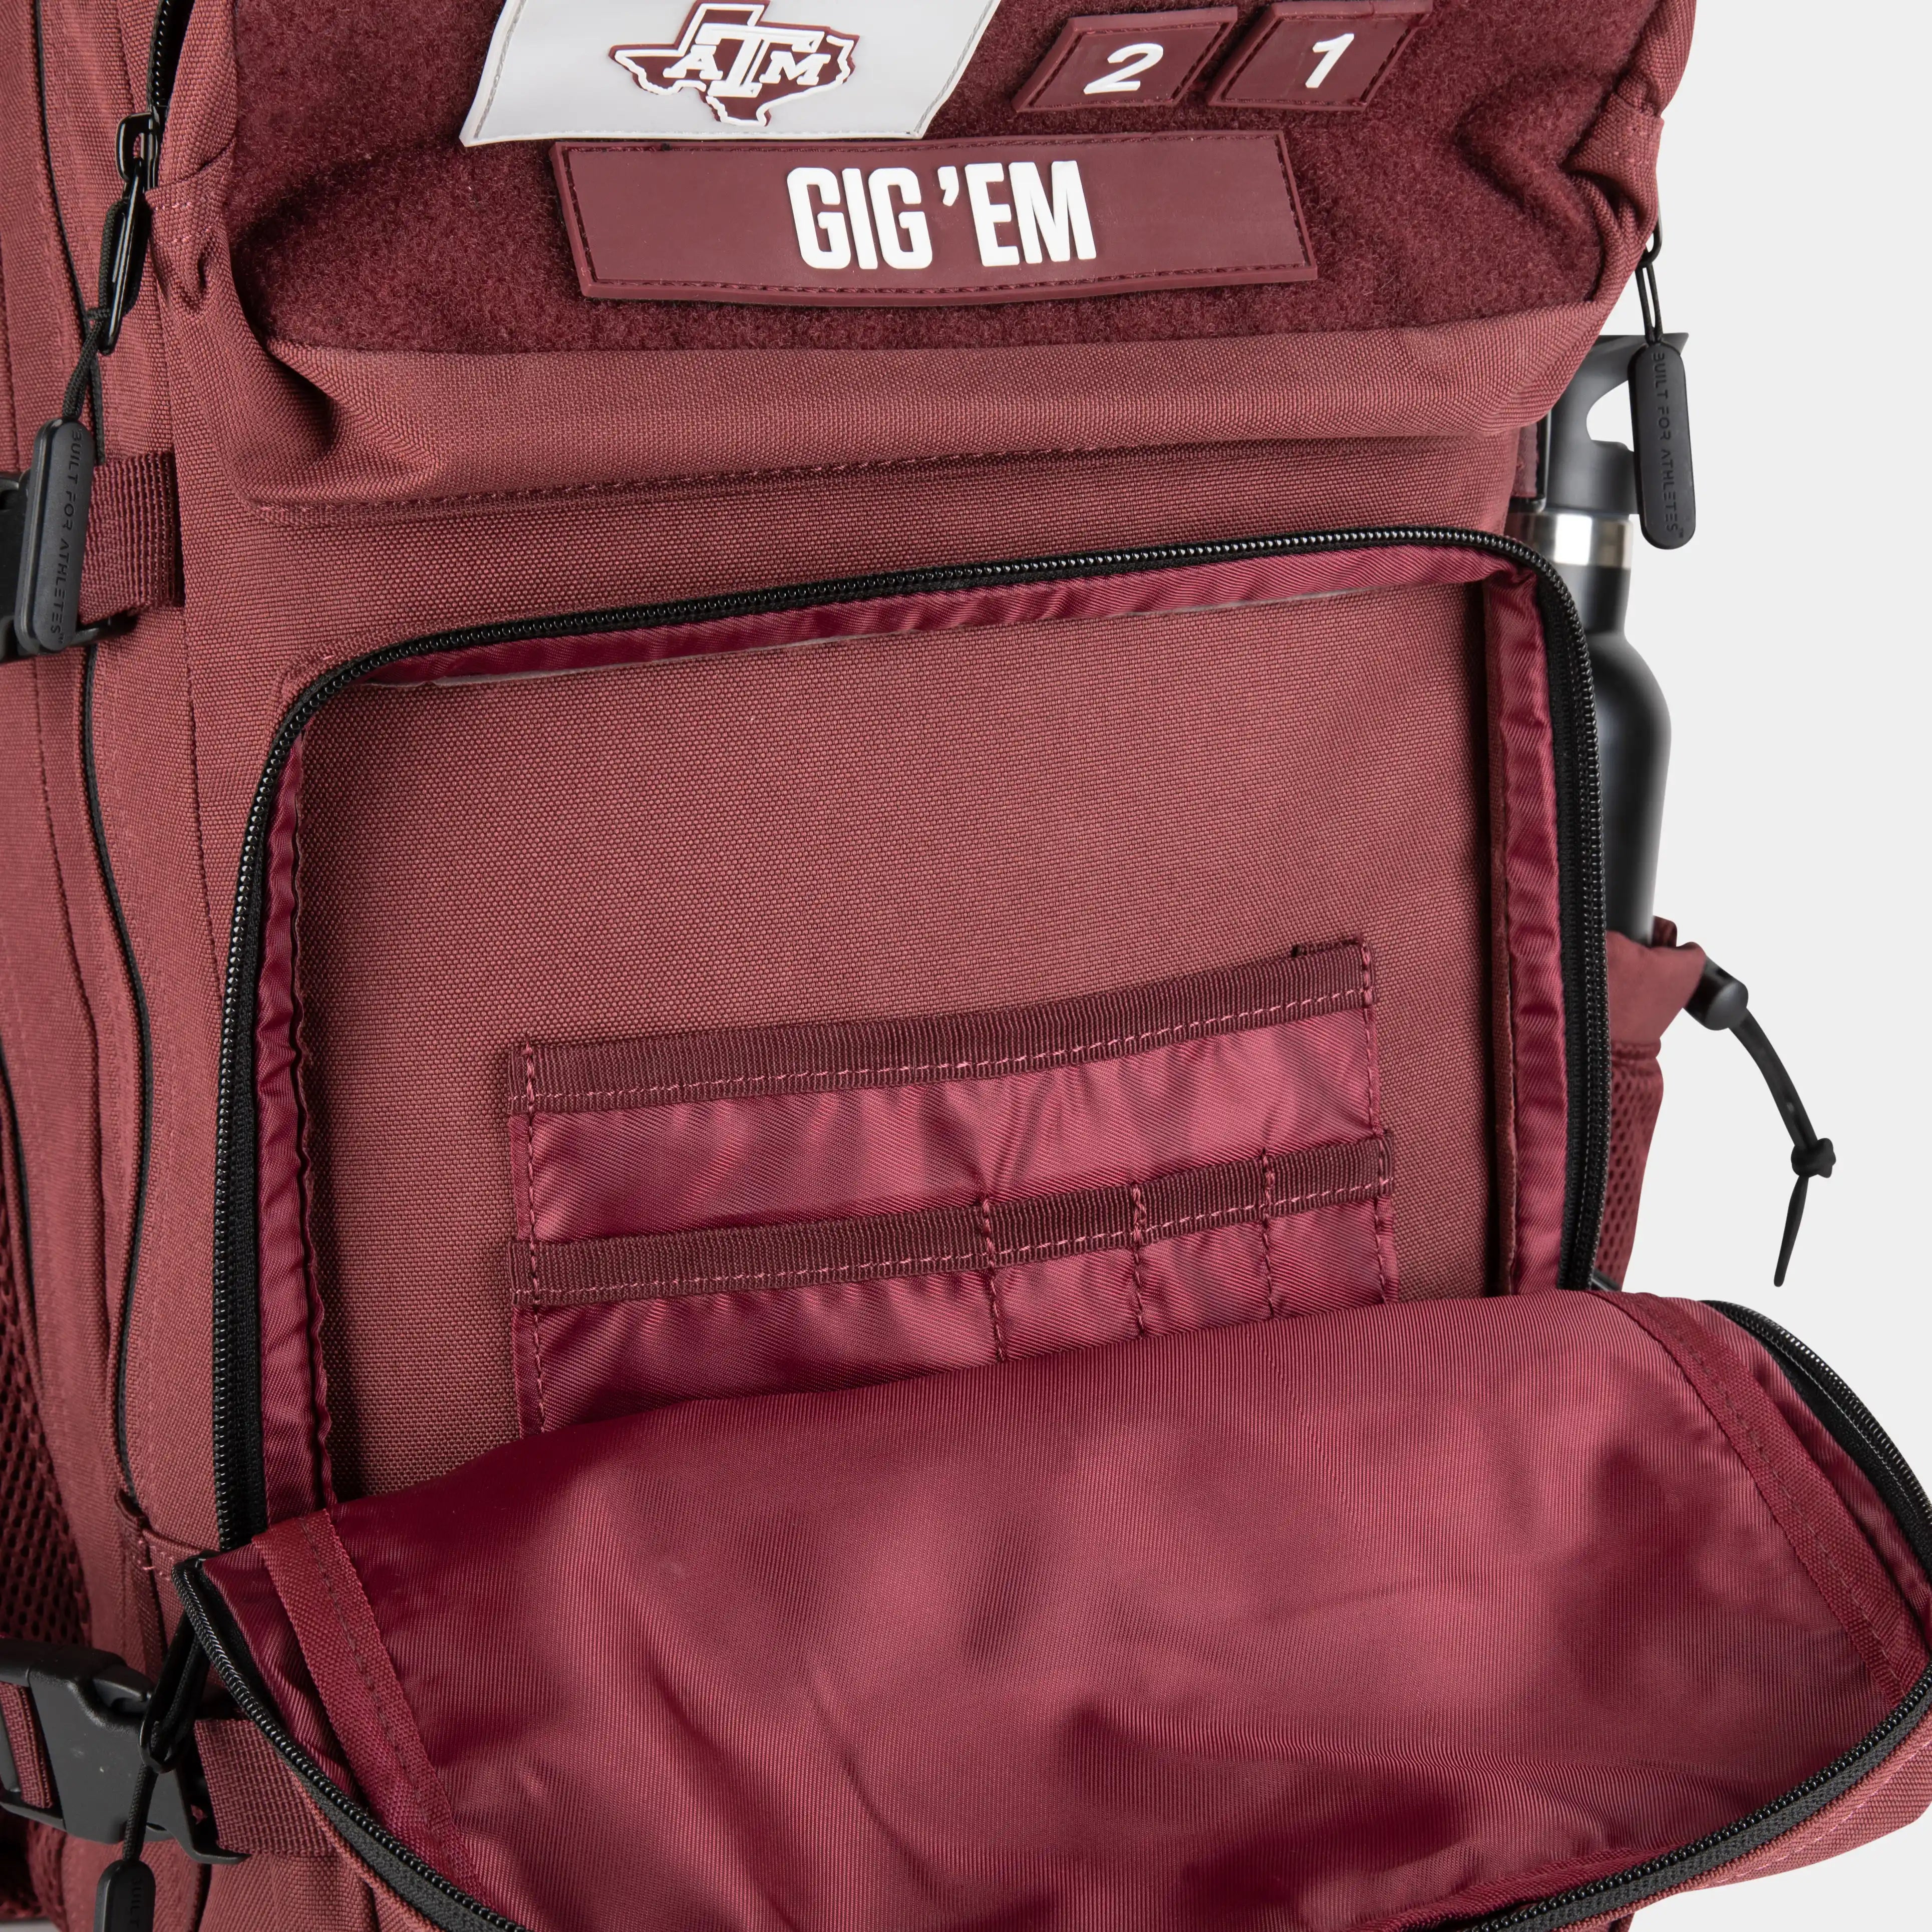 Built for Athletes Backpacks Large Texas A&M Gym Backpack